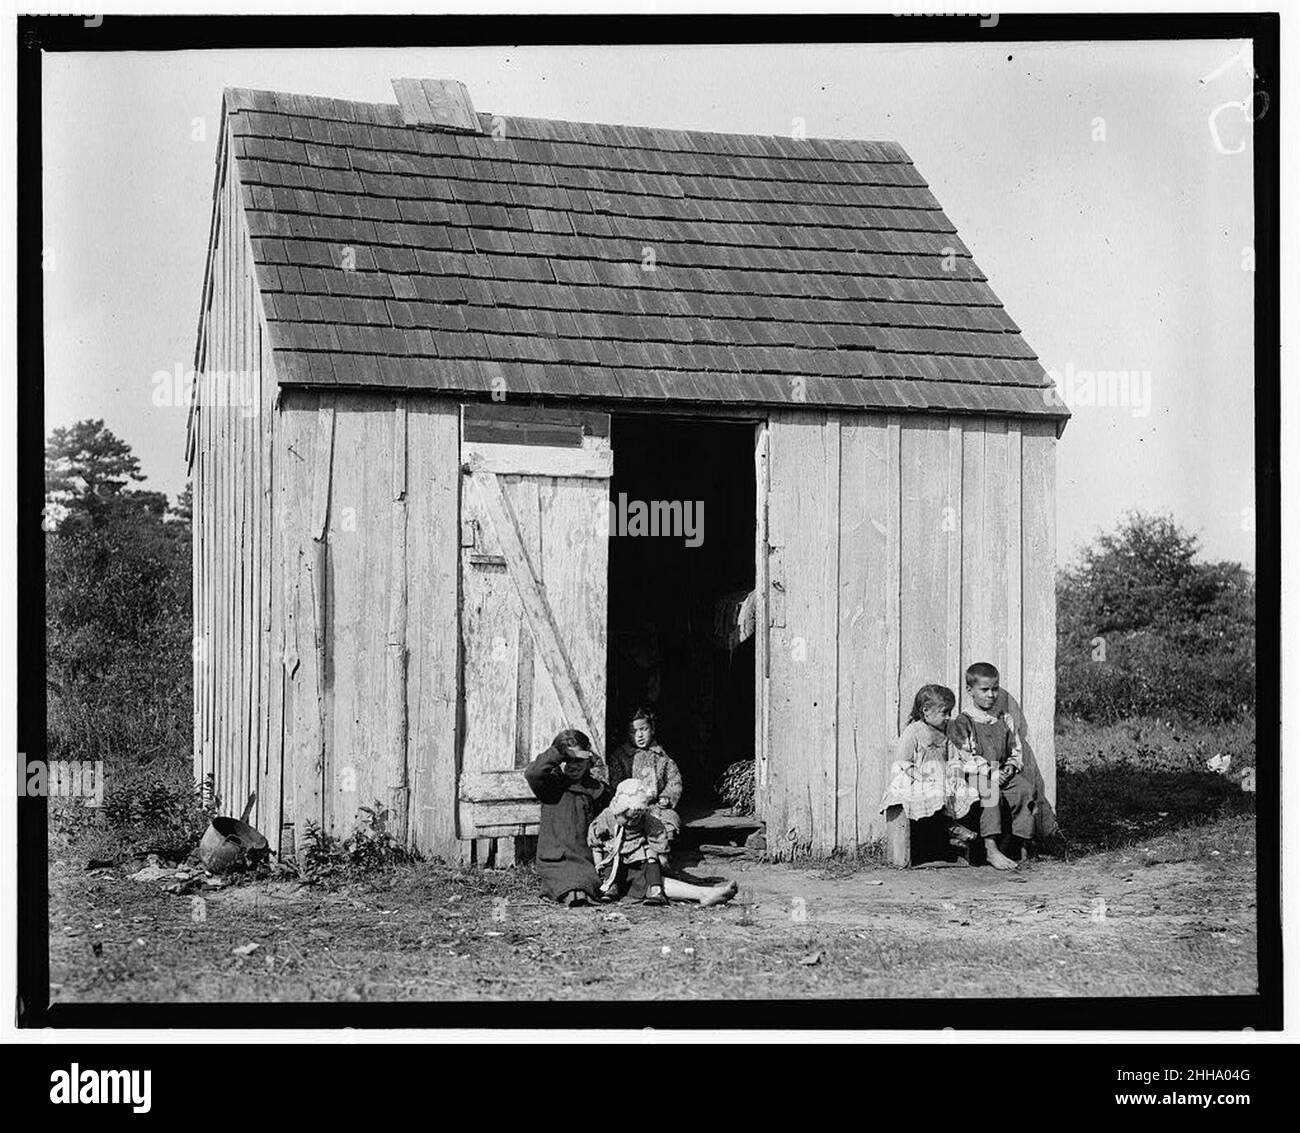 Small shack on Forsythe's Bog, occupied by De Marco family, 10 in the family living in this one room. Room is 10 ft. x 11 ft. x 5 1-2 ft. high and gable attic above. (See family picking Stock Photo